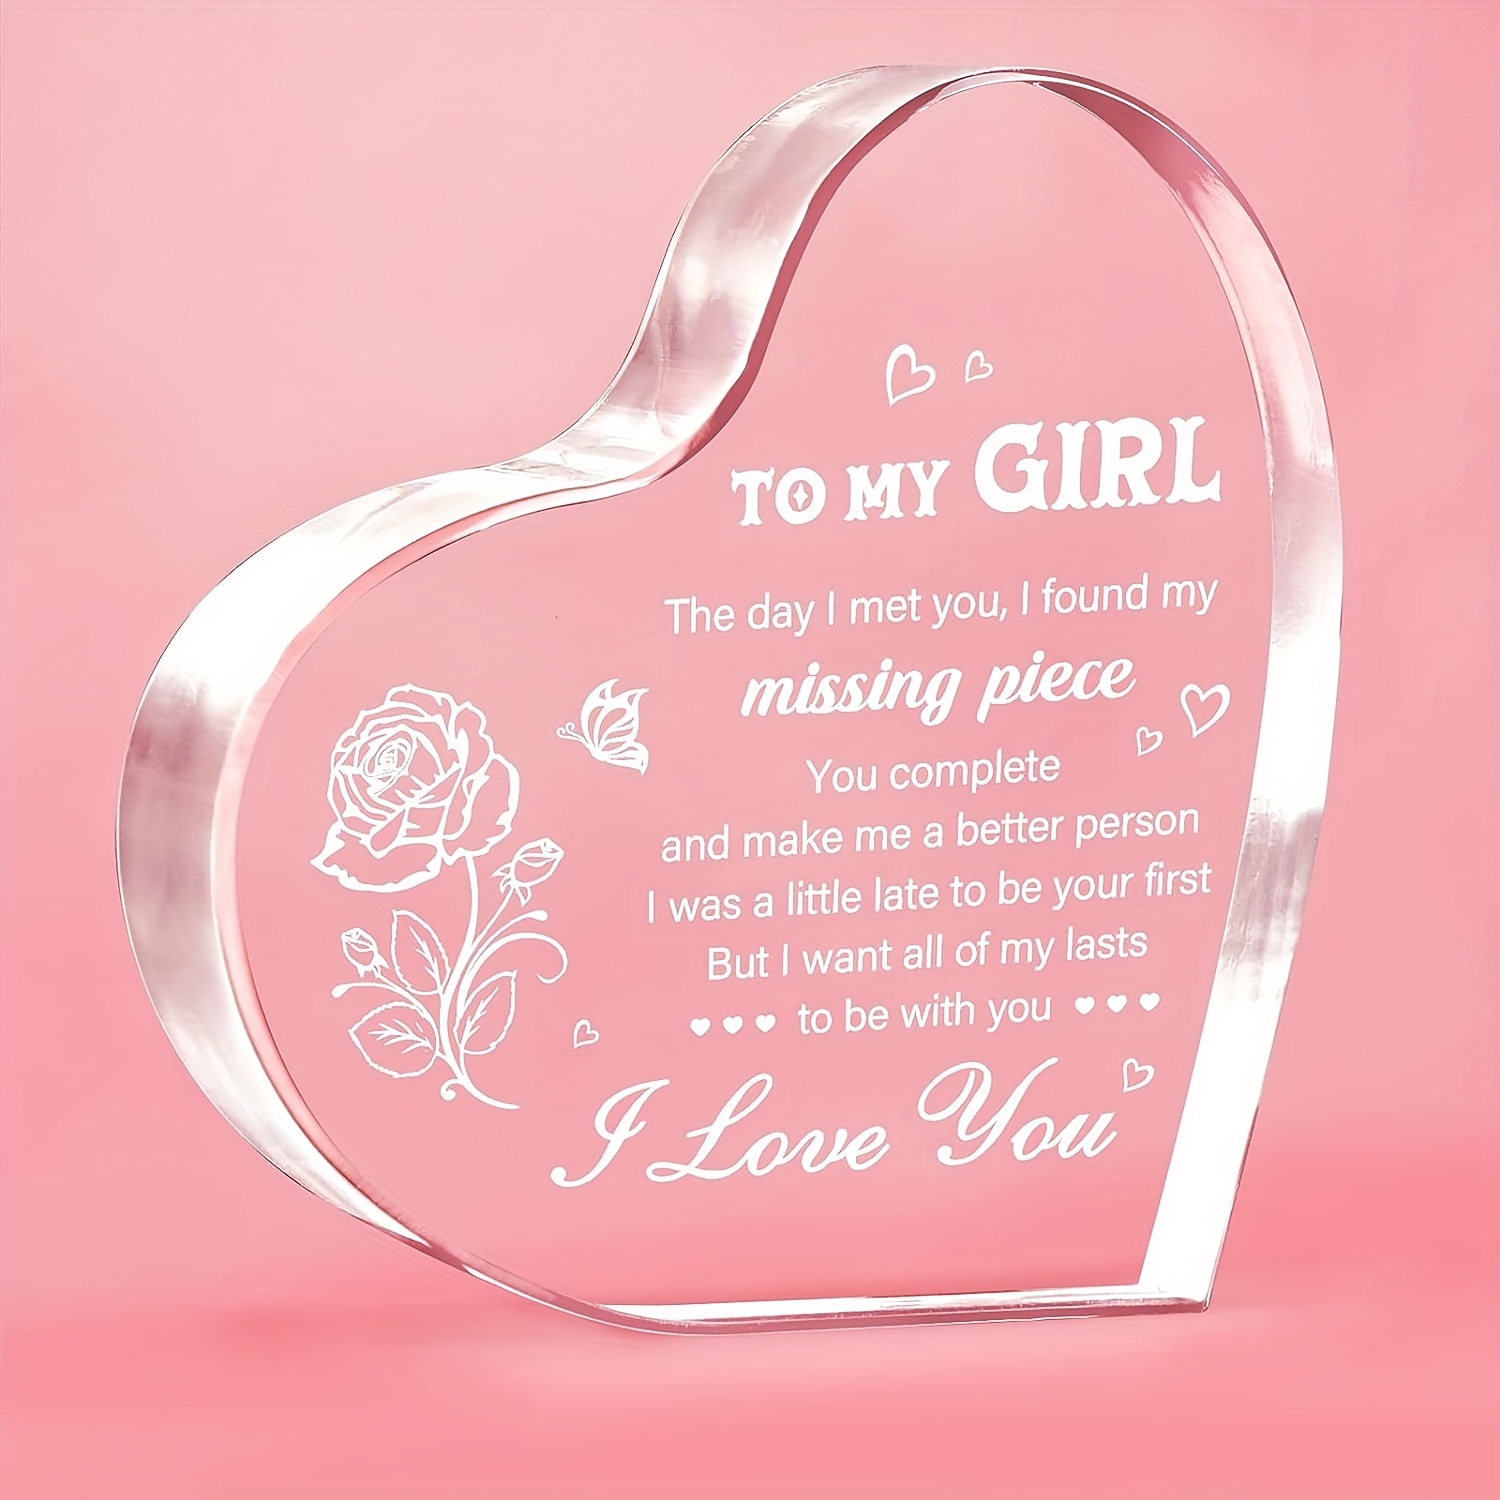 Gifts for Wife - I Love You Wife Gift Gold Compact Tabletop Mount Mirror -  Romantic Gifts for Her Birthday, Wedding Anniversary, Valentines Day